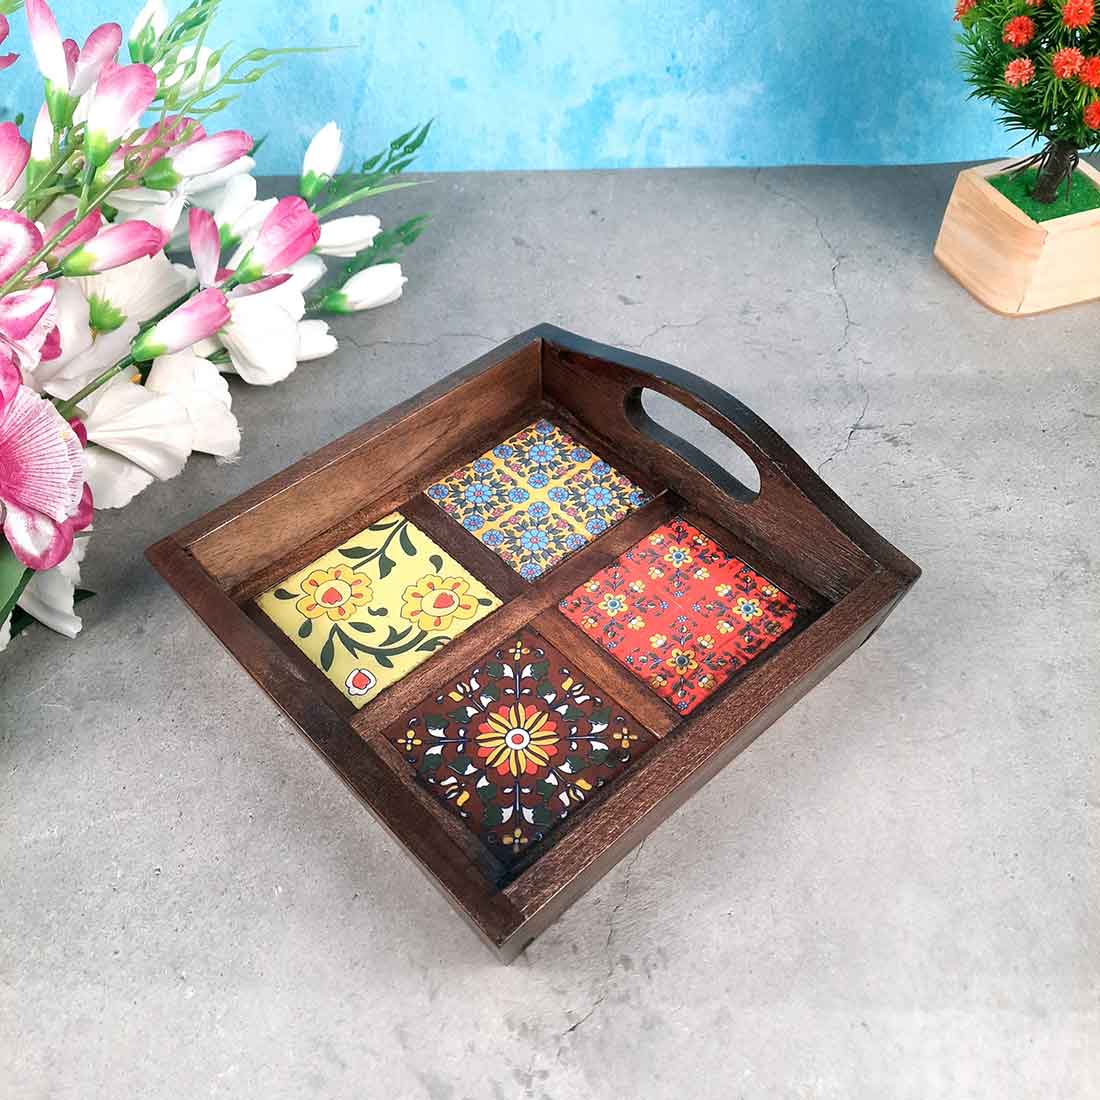 Serving Tray With In-Built Ceramic Tiles | Tea Tray - For Serving, Kitchen, Home Decor & Gifts - 9 Inch -Apkamart #Style_Classic